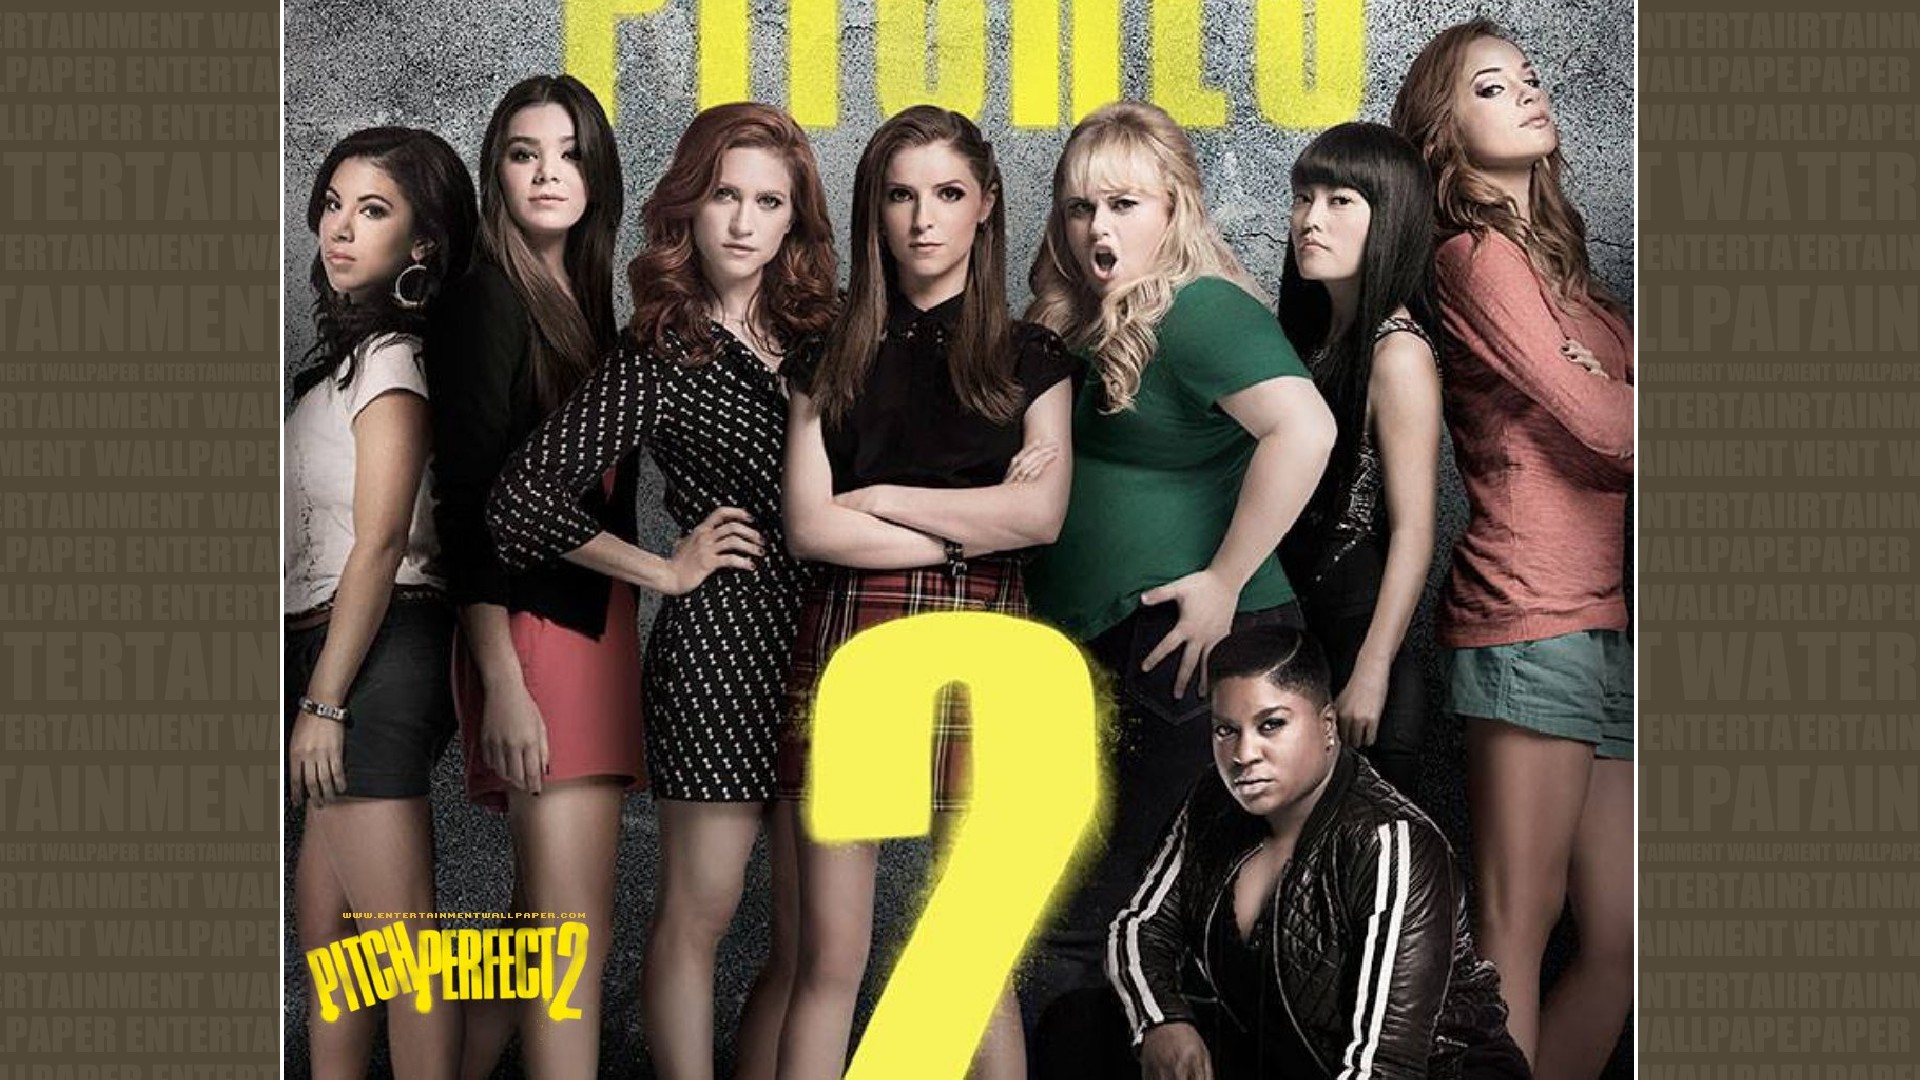  pitch perfect 2 wallpaper 10045662 size 1920x1080 more pitch perfect 2